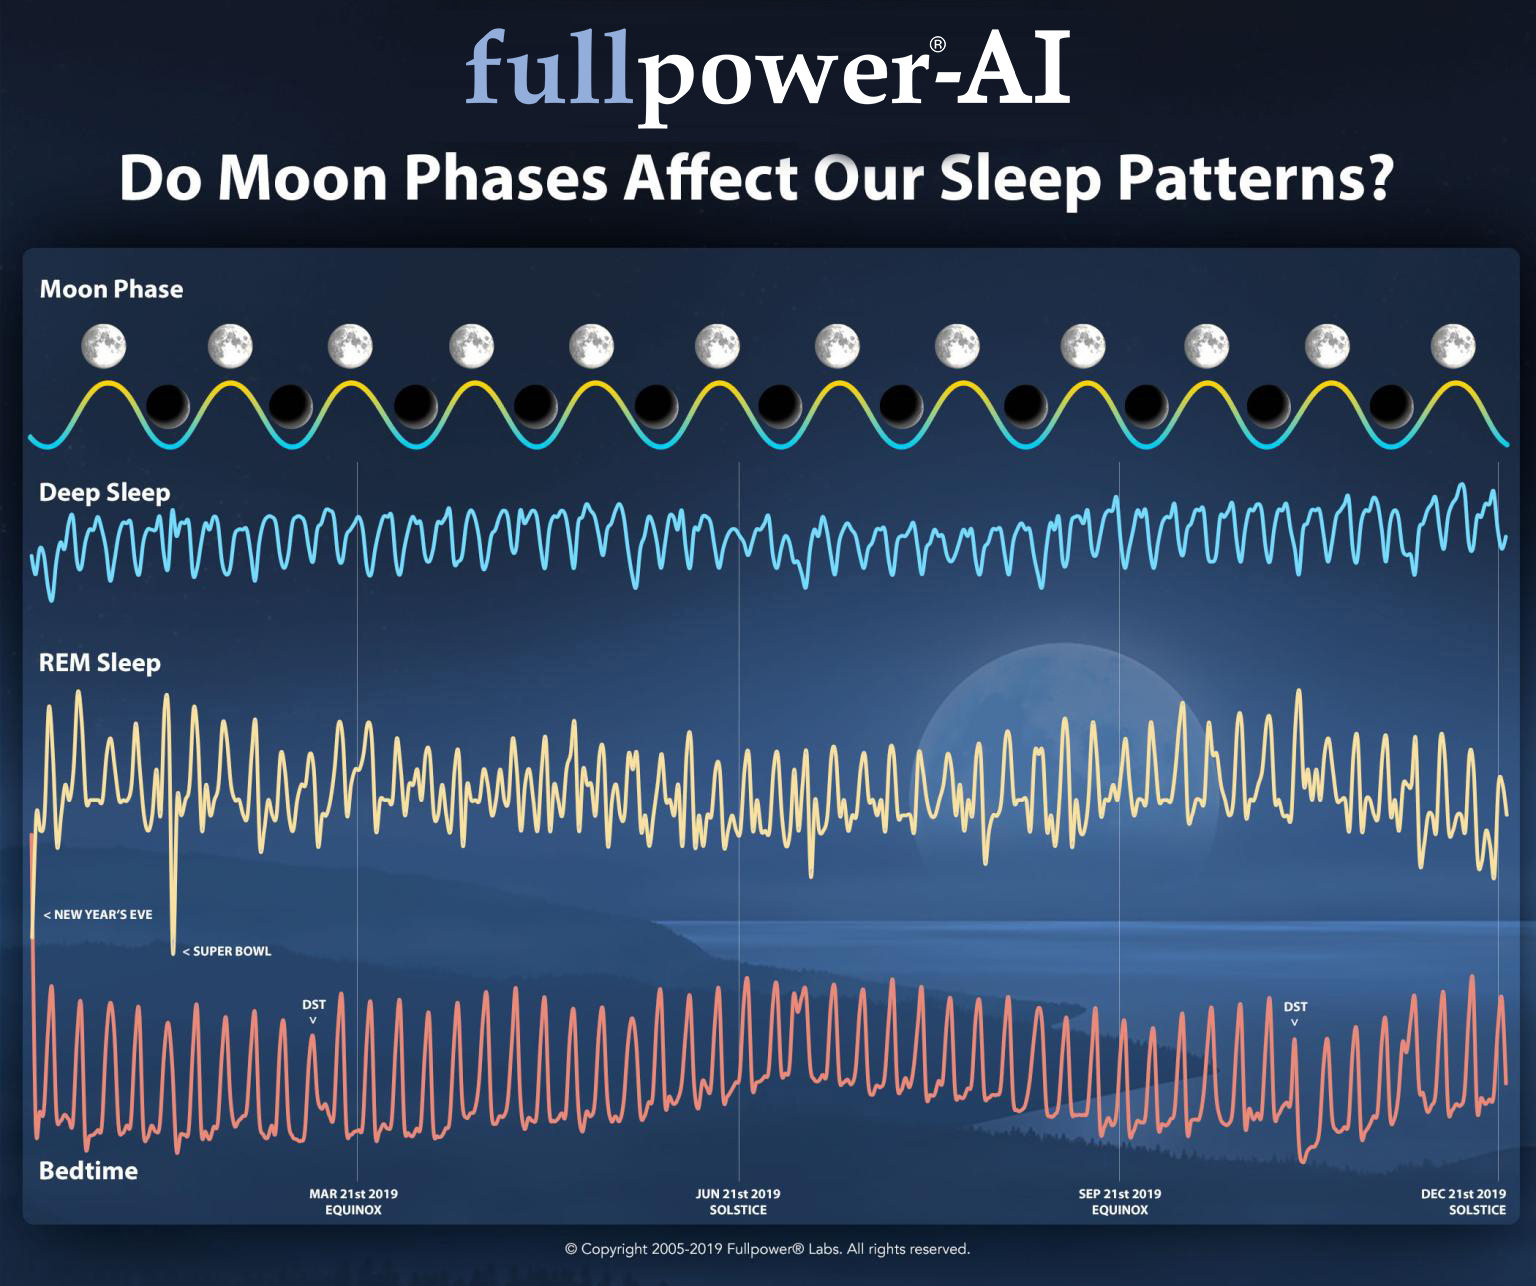 Do Moon Phases Affect Our Sleep Patterns